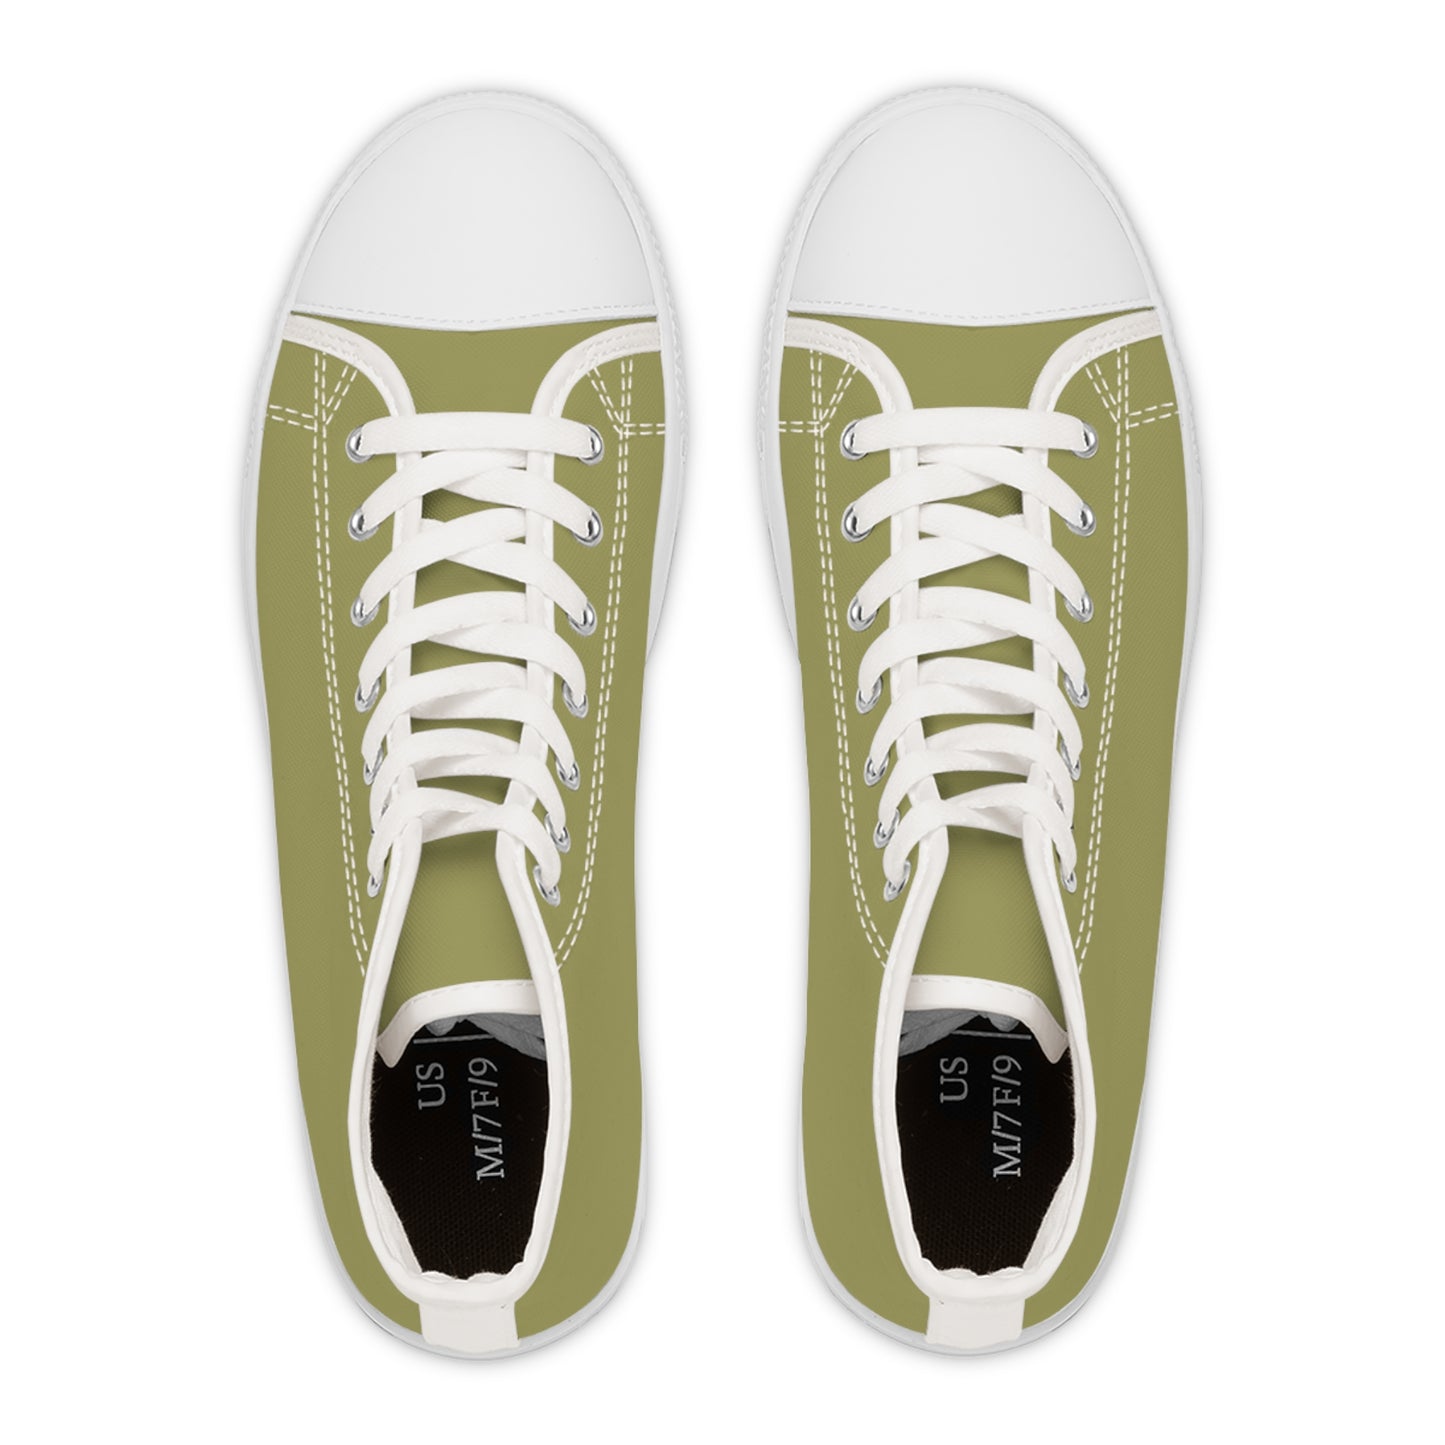 Women's Canvas High Top Solid Color Sneakers - Light Moss US 12 White sole